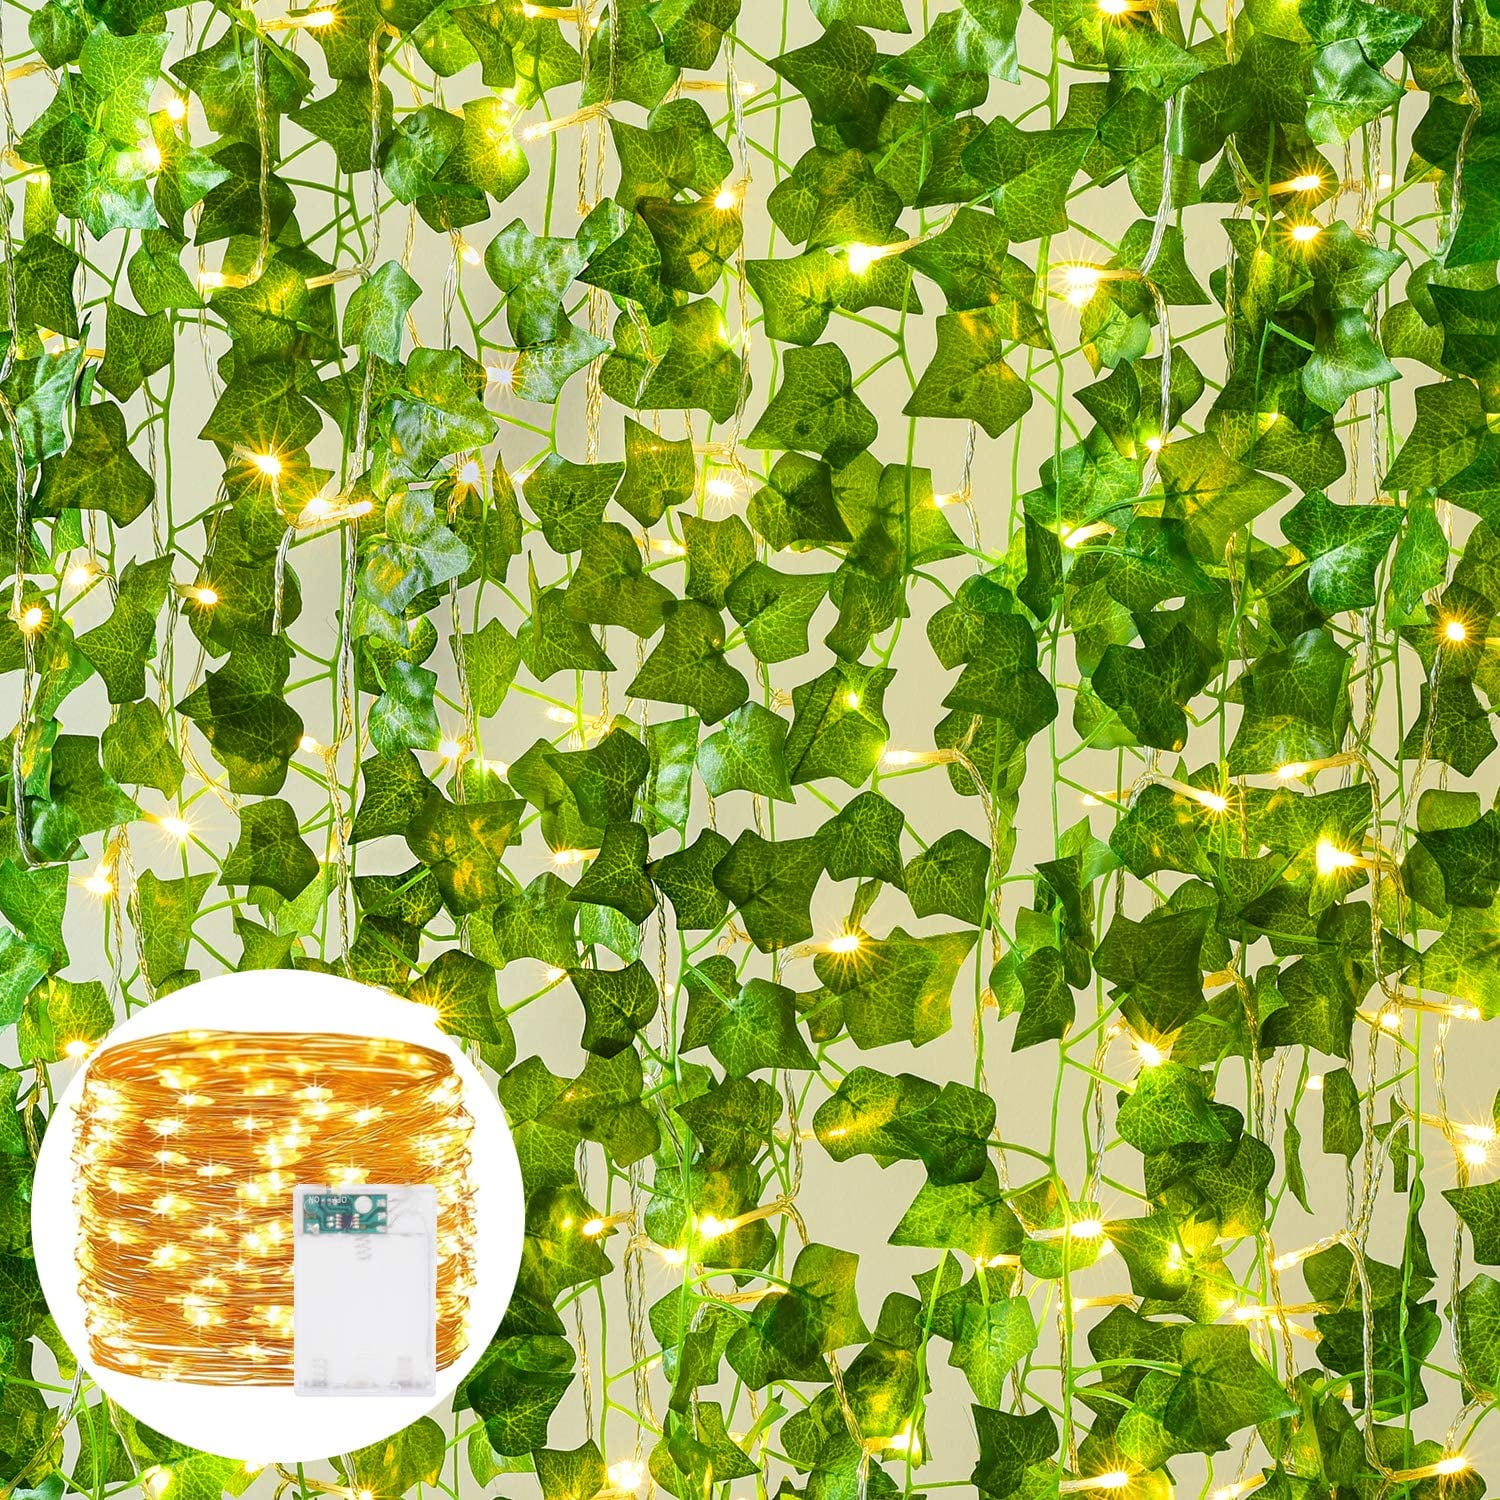 Green For Wed Details about   Gpark 12Pack Artificial Ivy Garland Fake Plants Each 82 Inch 